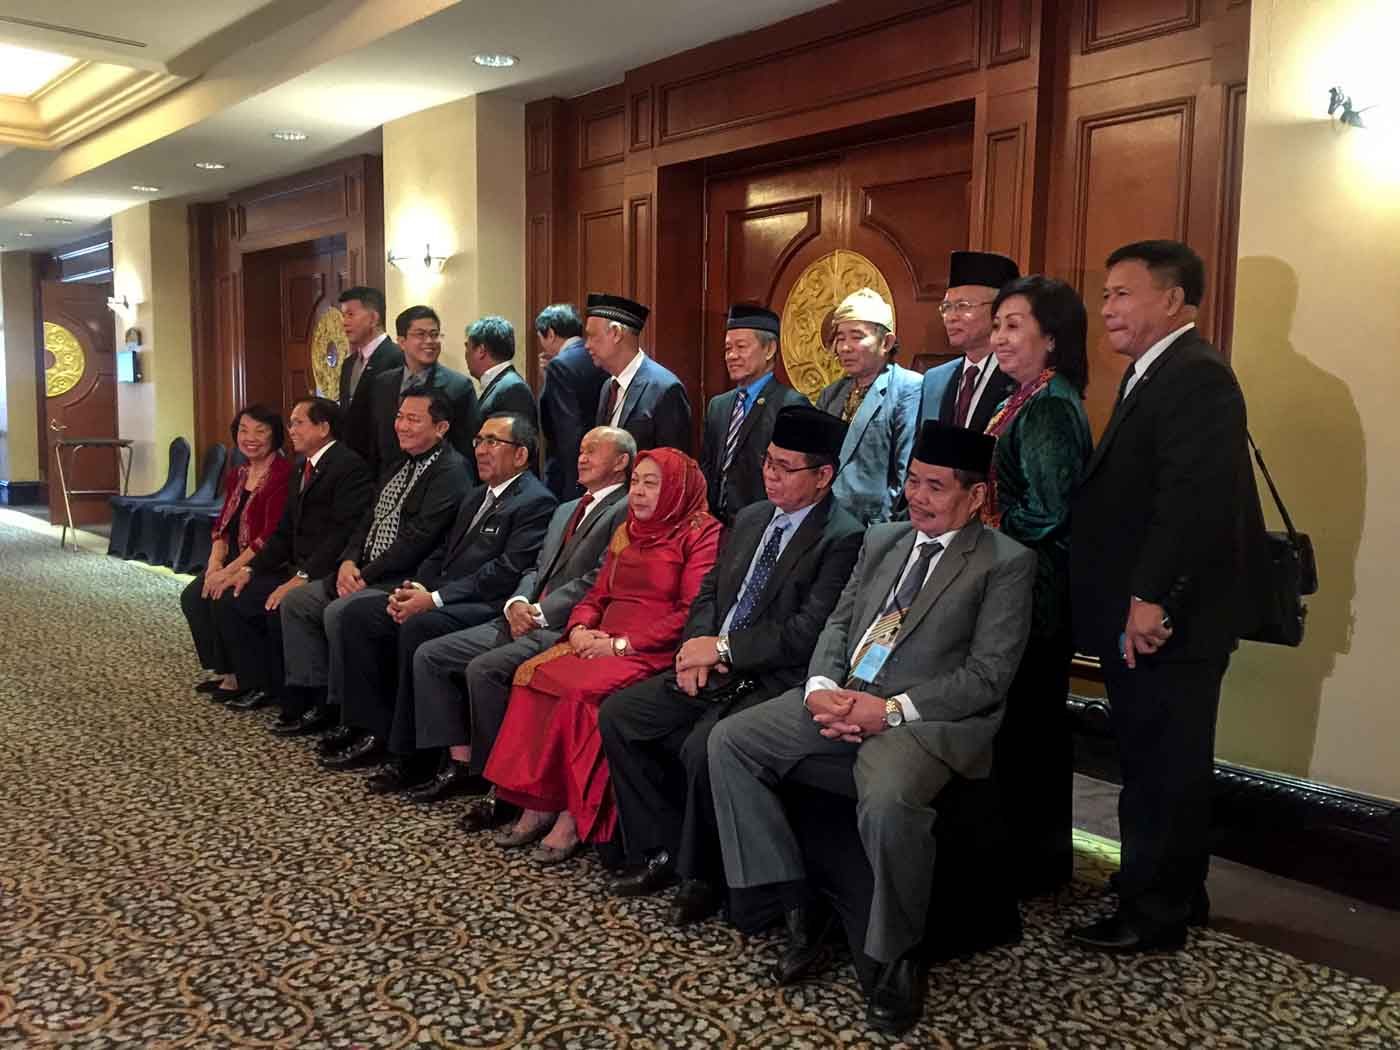 FORMALITY. The peace process gets a boost in Selangor, Malaysia as members of both the Philippine government and the MILF as well as representatives of the Malaysian government sit down once again. Photo by Carol Ramoran/Rappler  